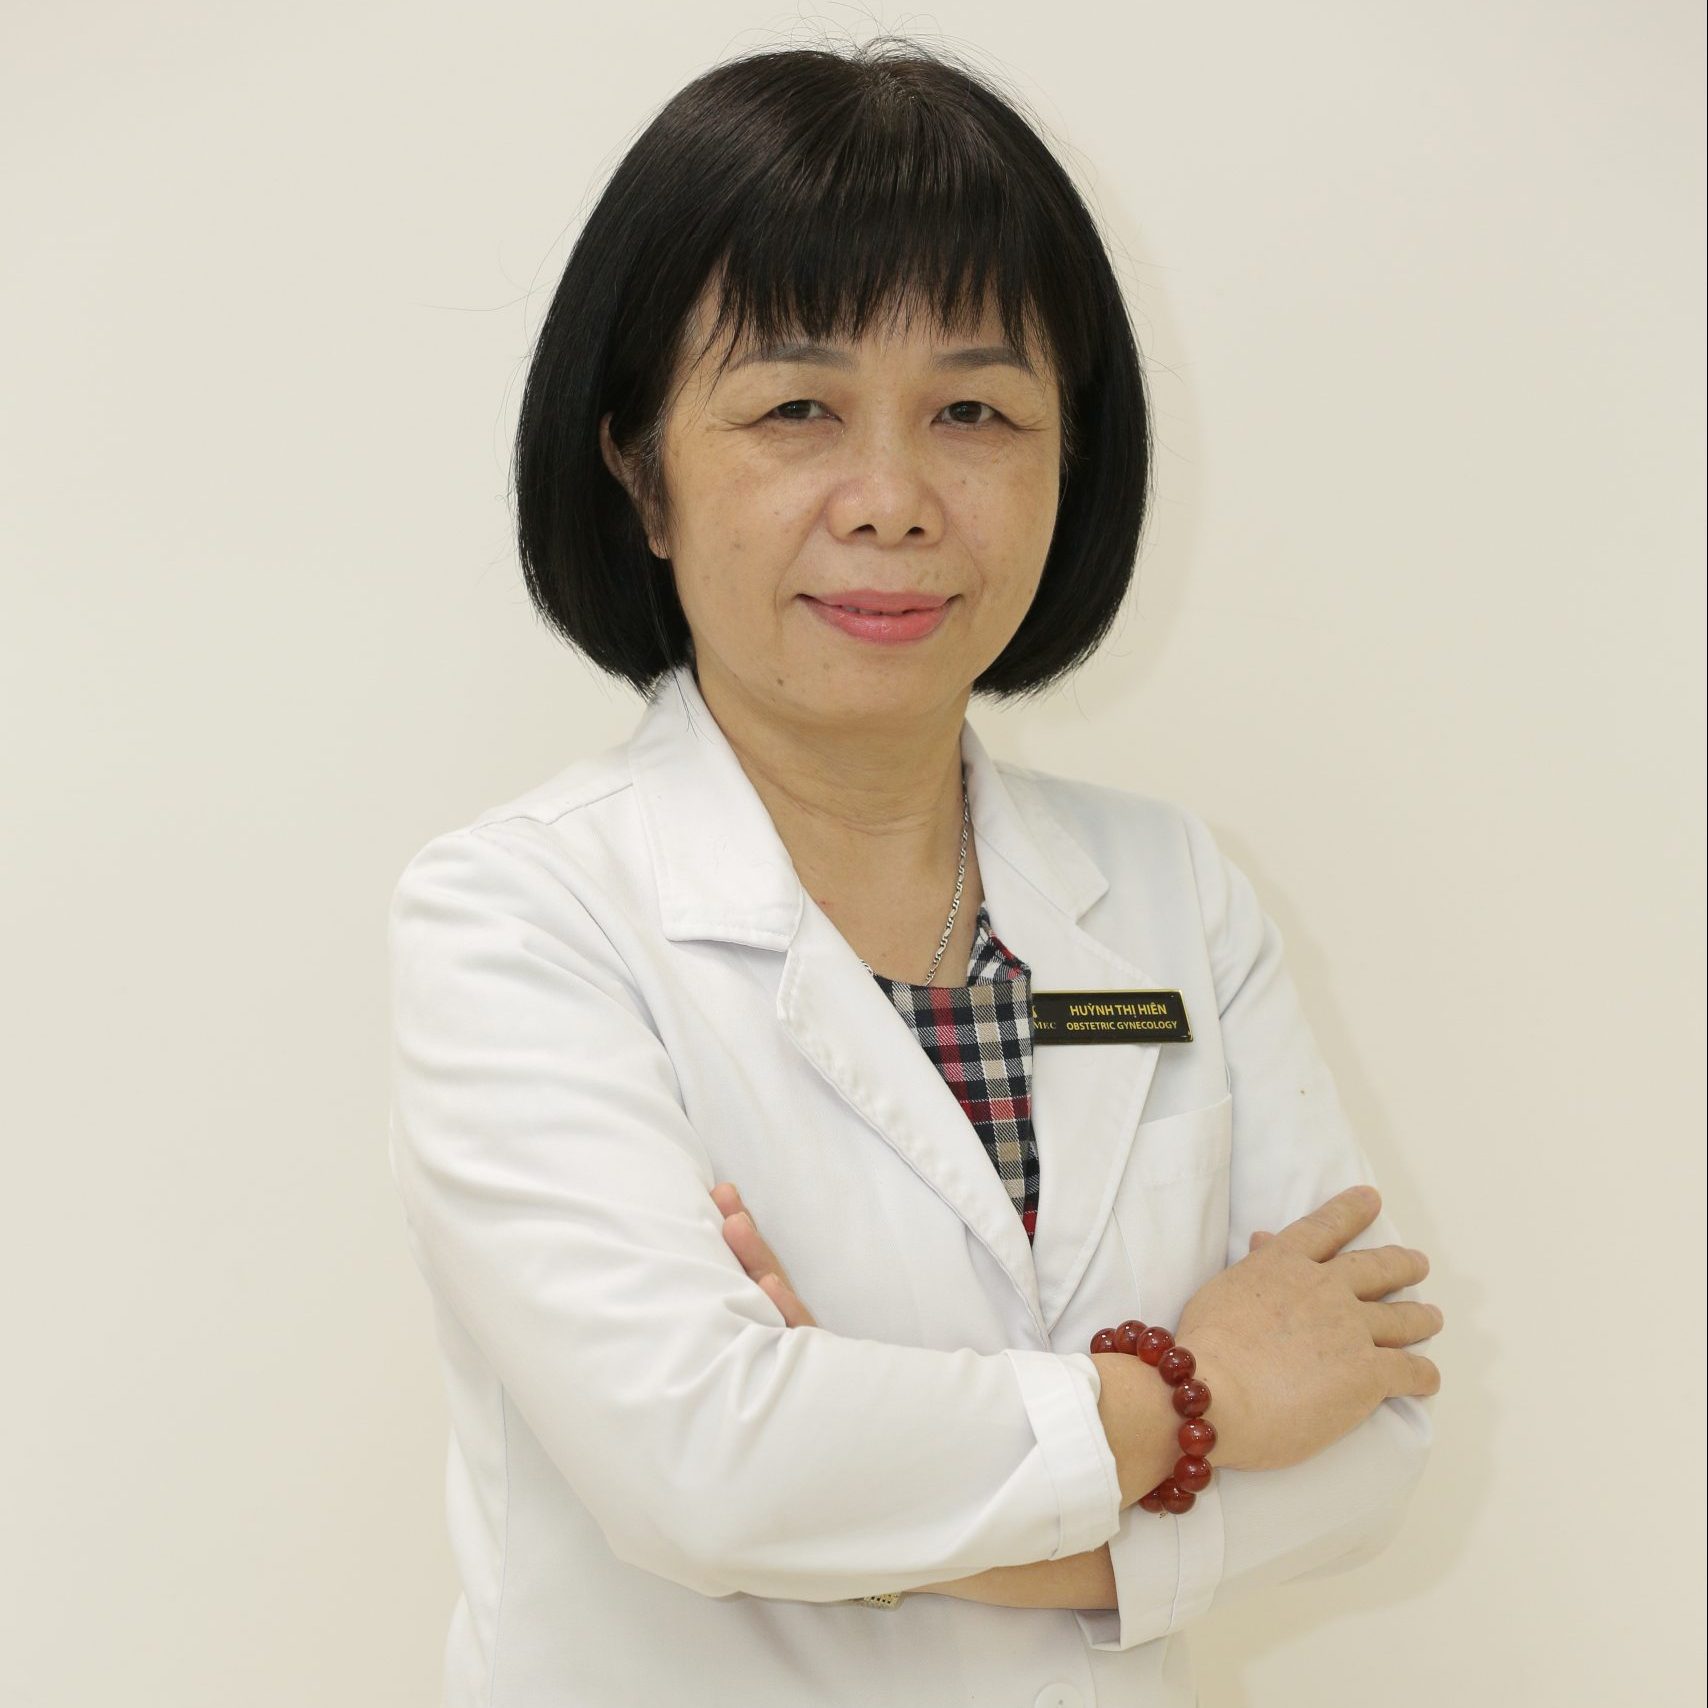 HUYNH THI HIEN, MD - SPECIALIST LEVEL II